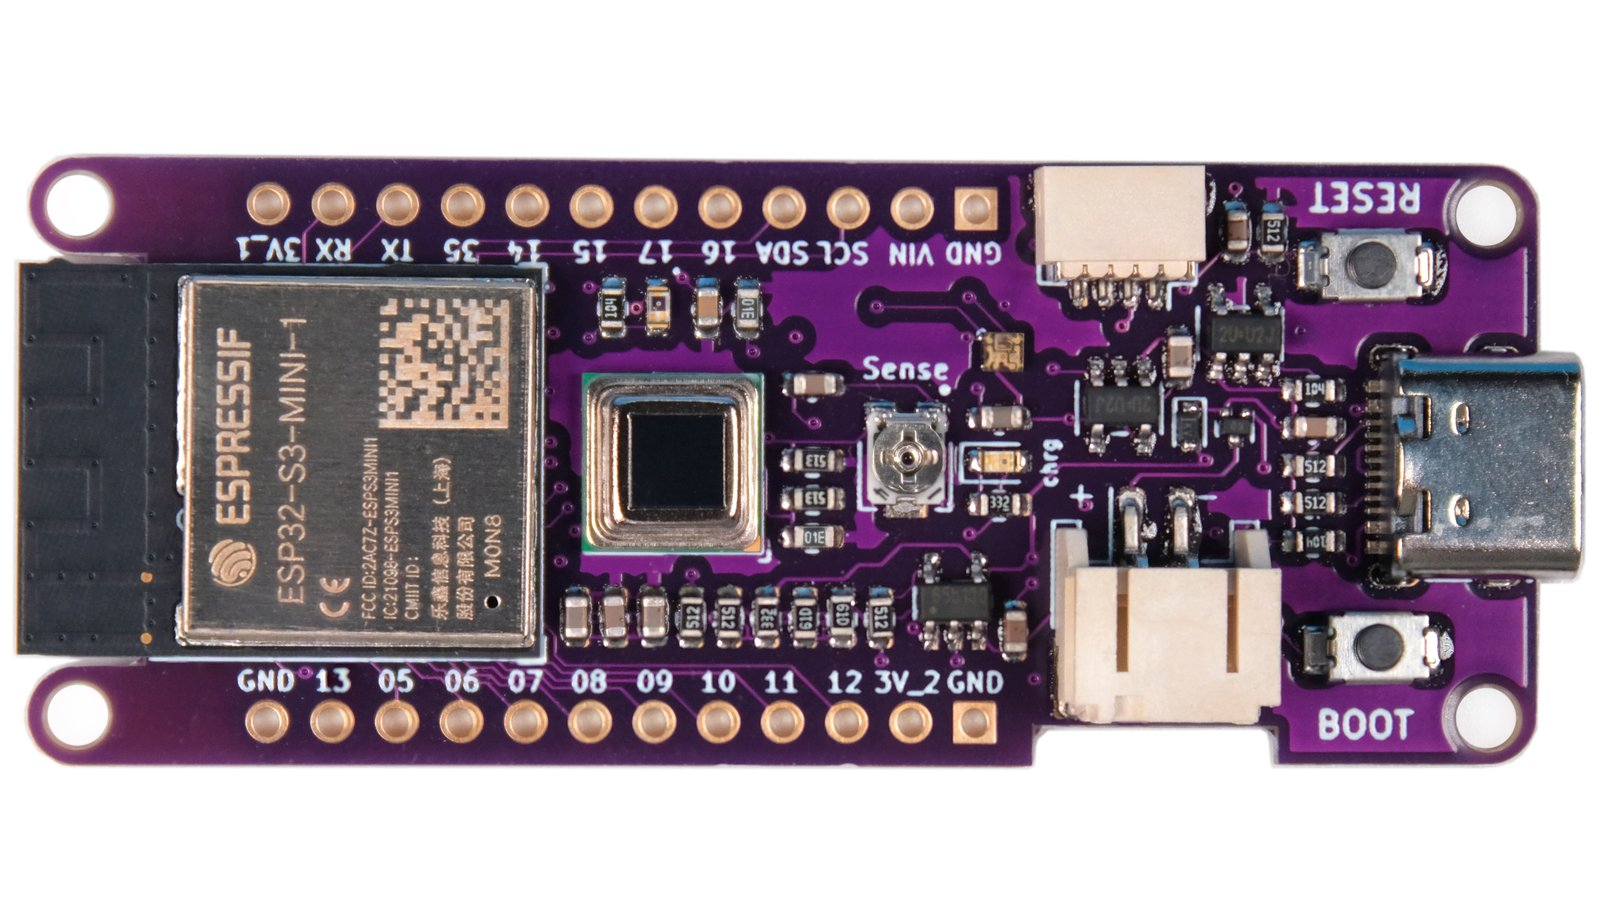 Bee Motion S3 is a compact, open-source ESP32-S3 PIR motion sensing board